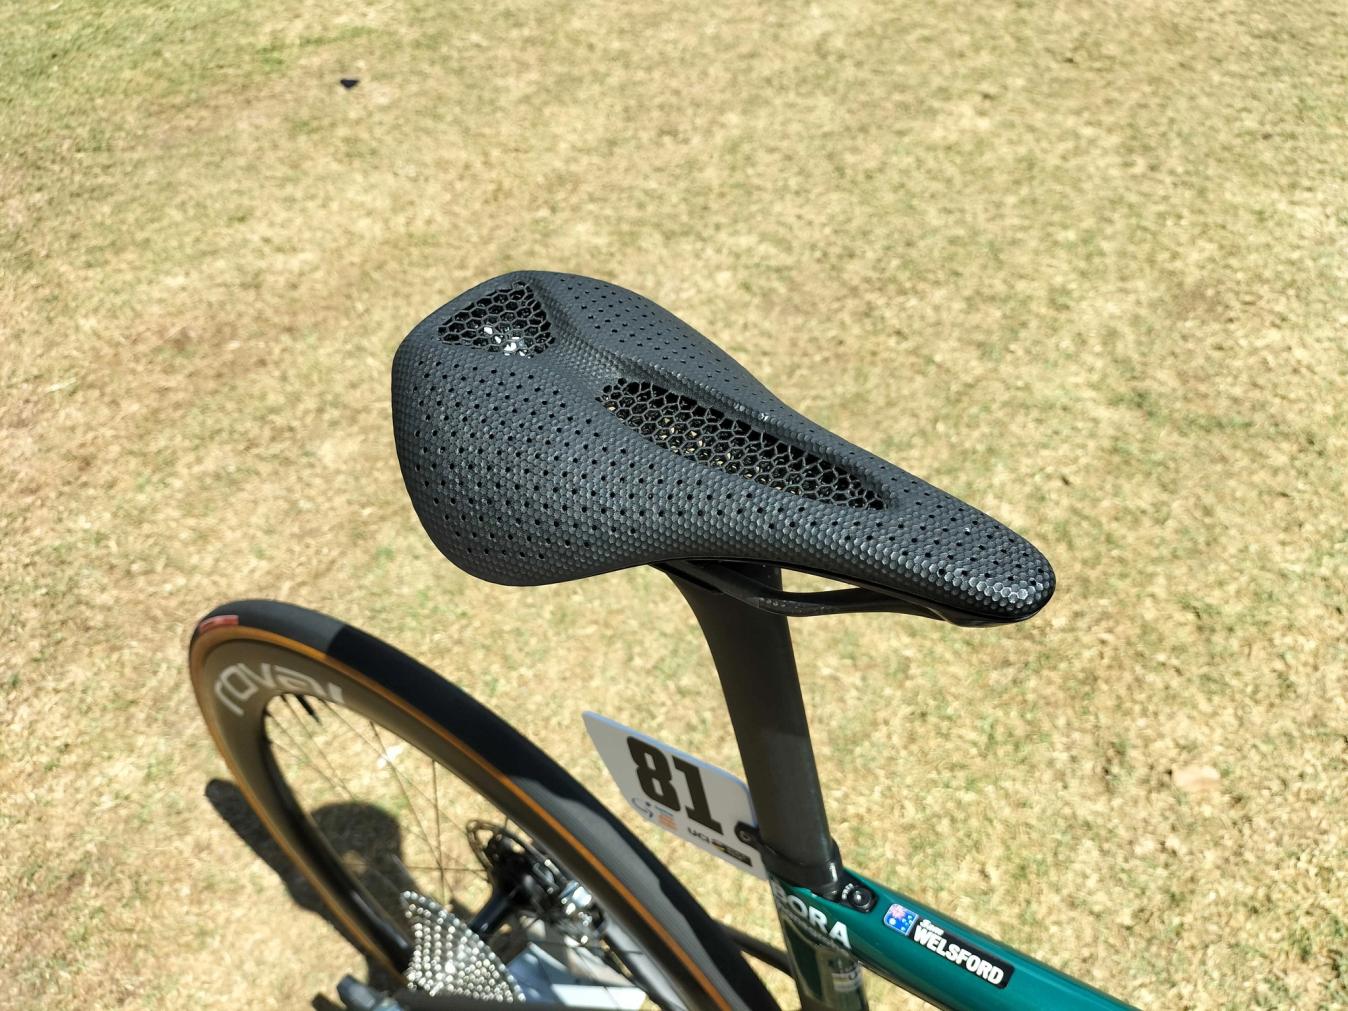 Specialized also provides the saddle